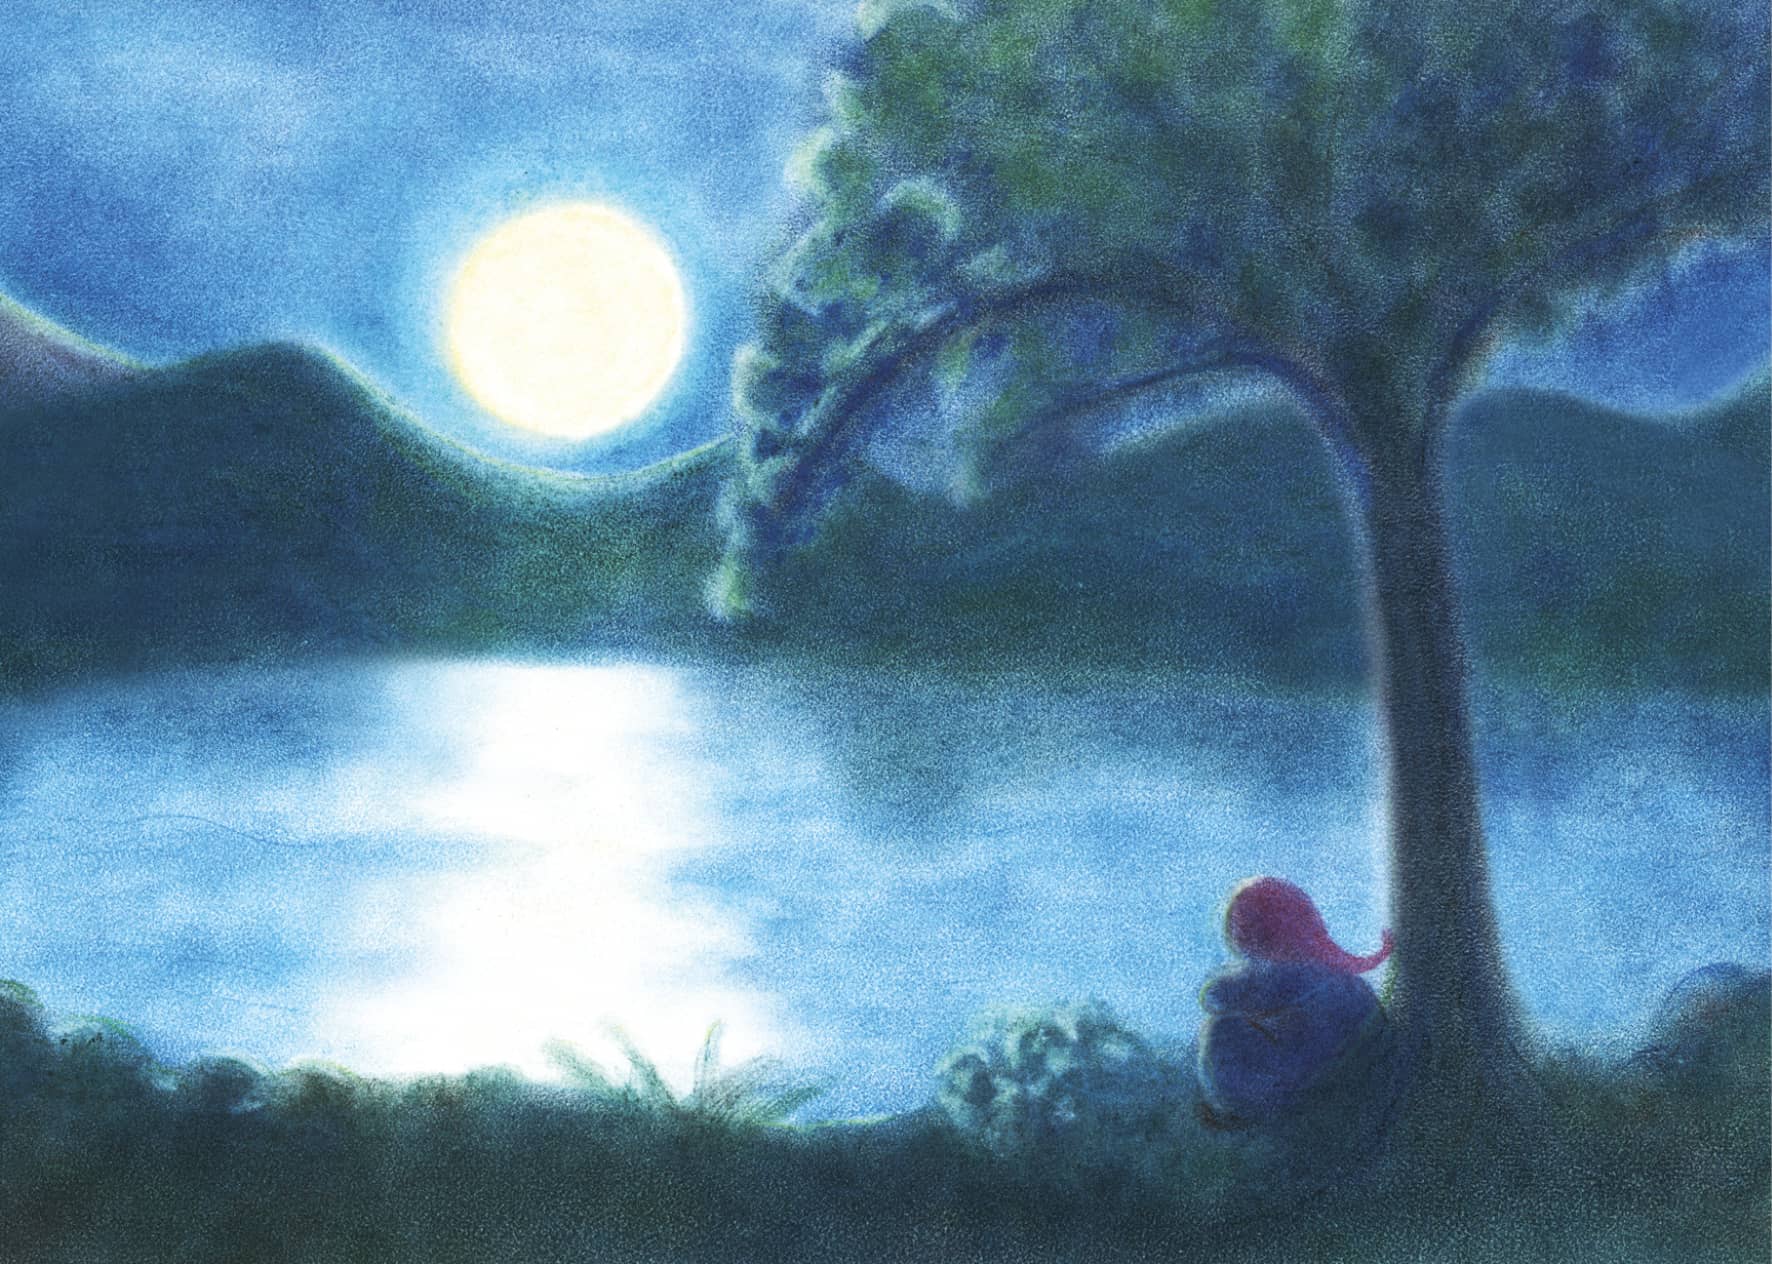 Seccorell postcard "Moonlit Night" illustrates a dwarf on the shore of a lake under a shining full moon, painted with Seccorell colors.